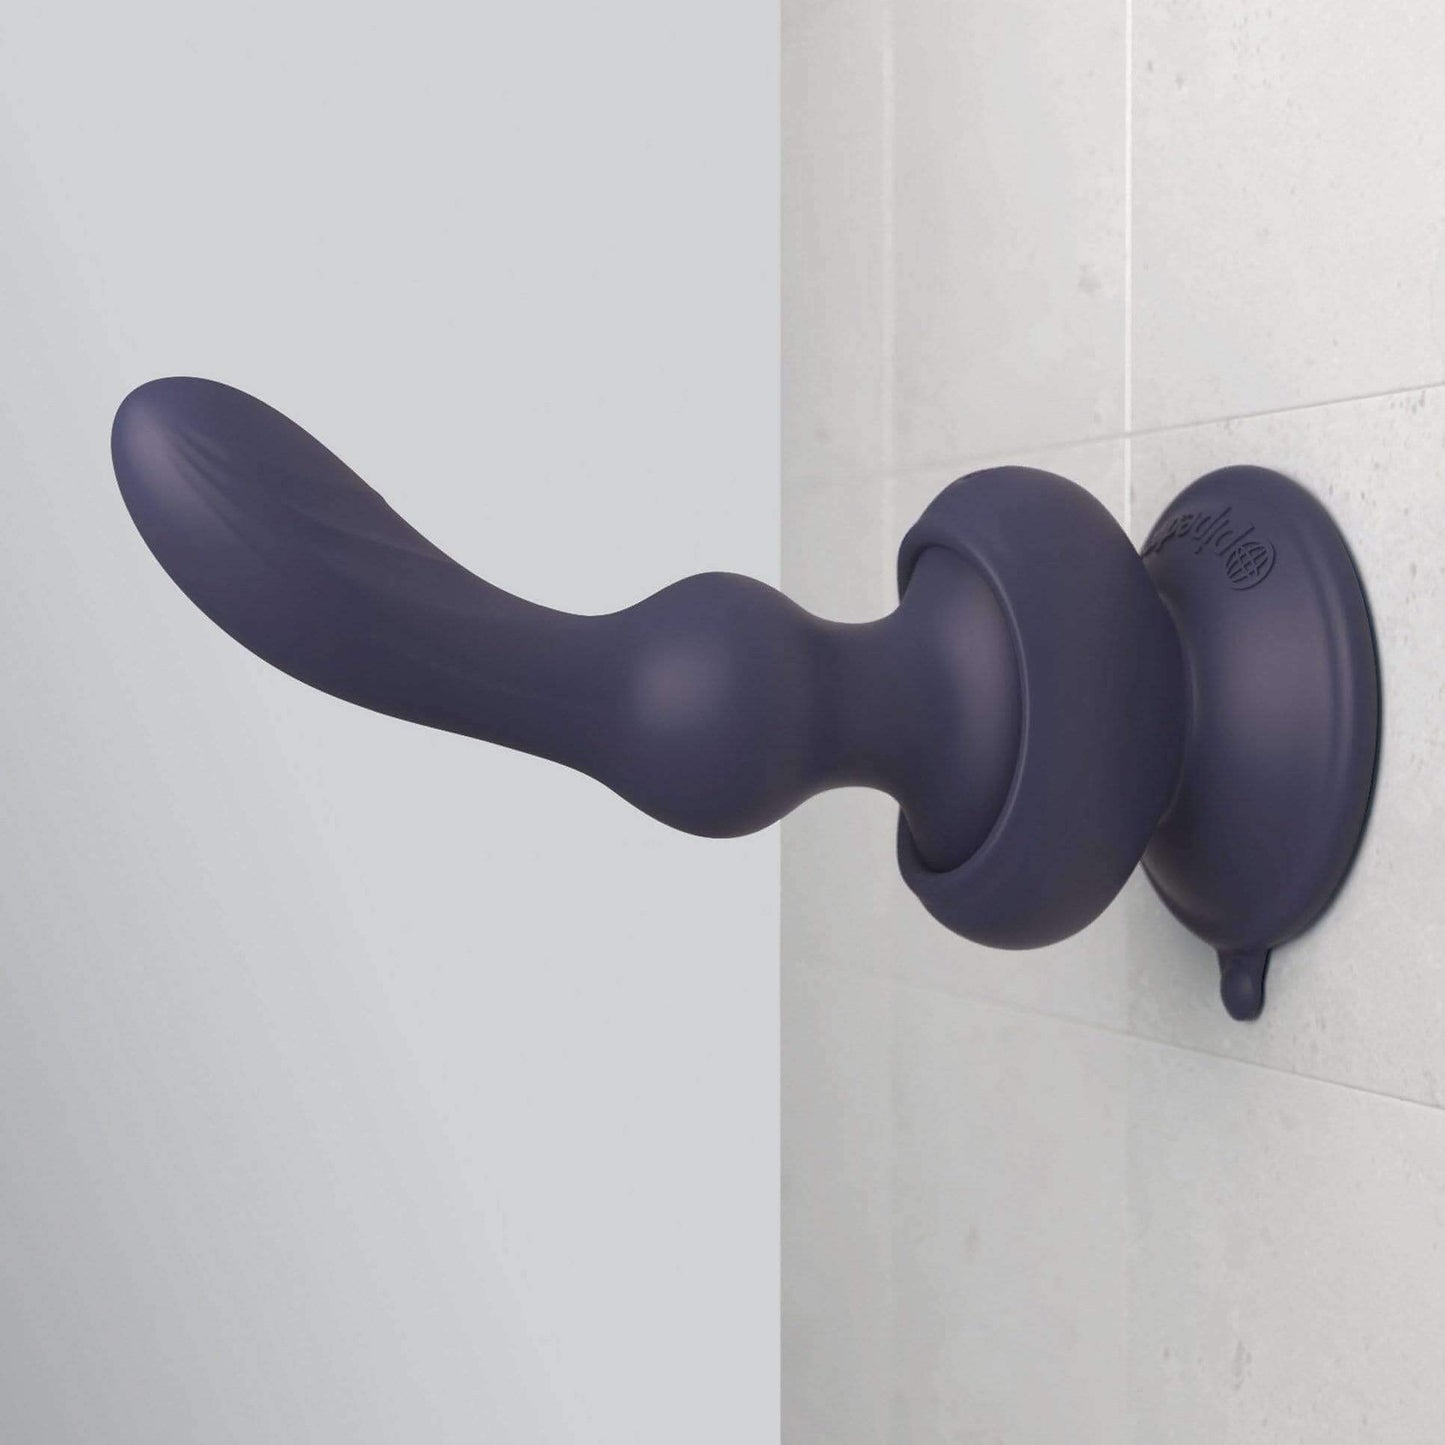 Wall Banger P-Spot - Blue - Thorn & Feather Sex Toy Canada